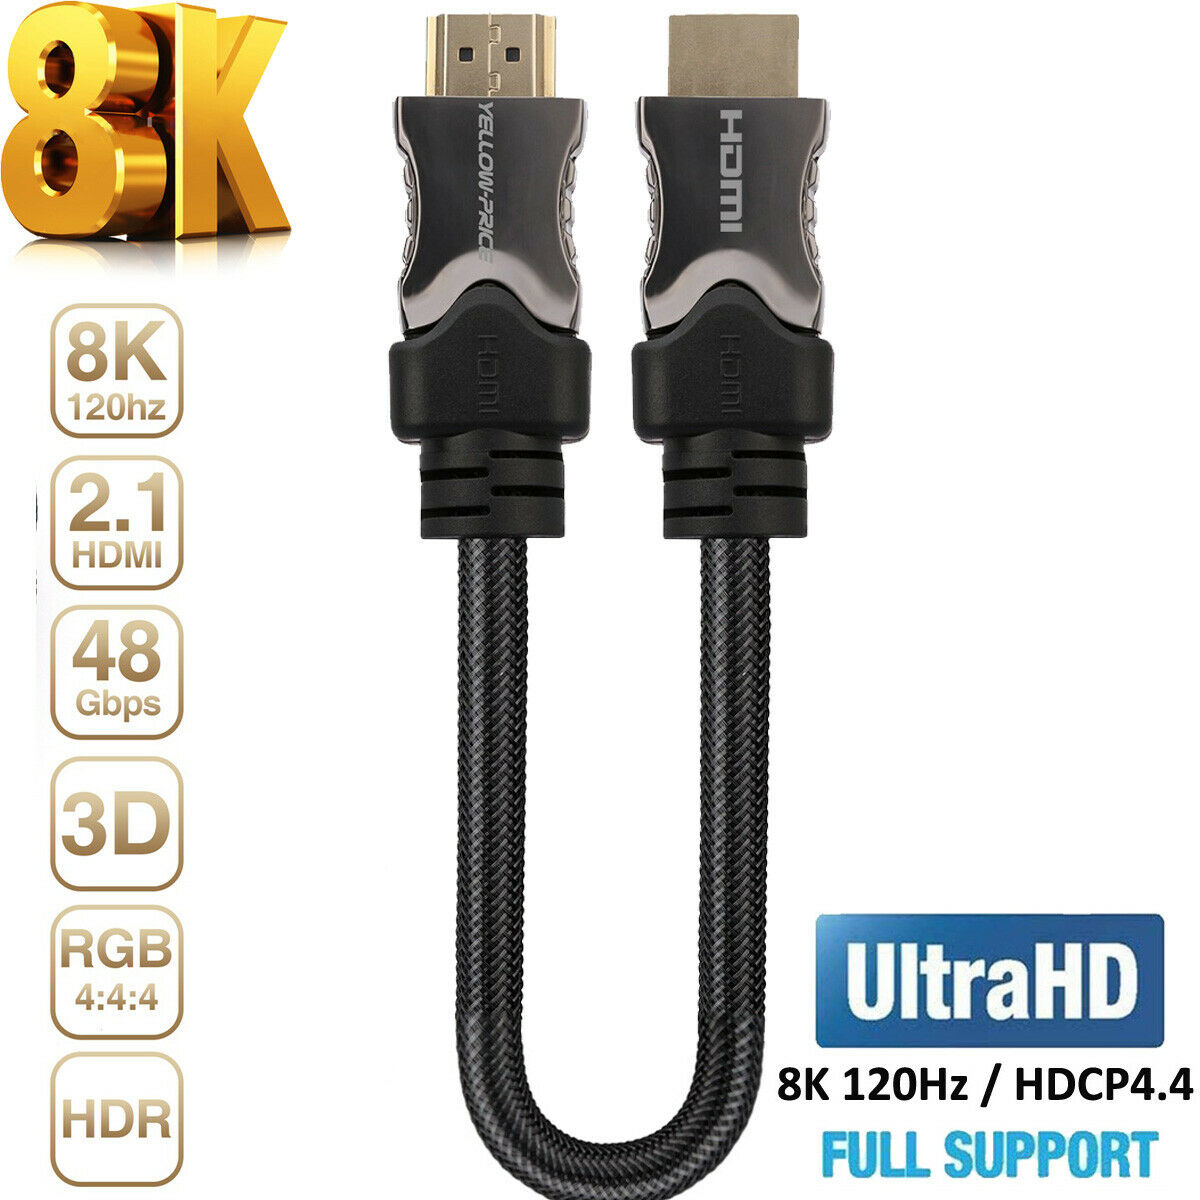 How To: HDMI 120Hz